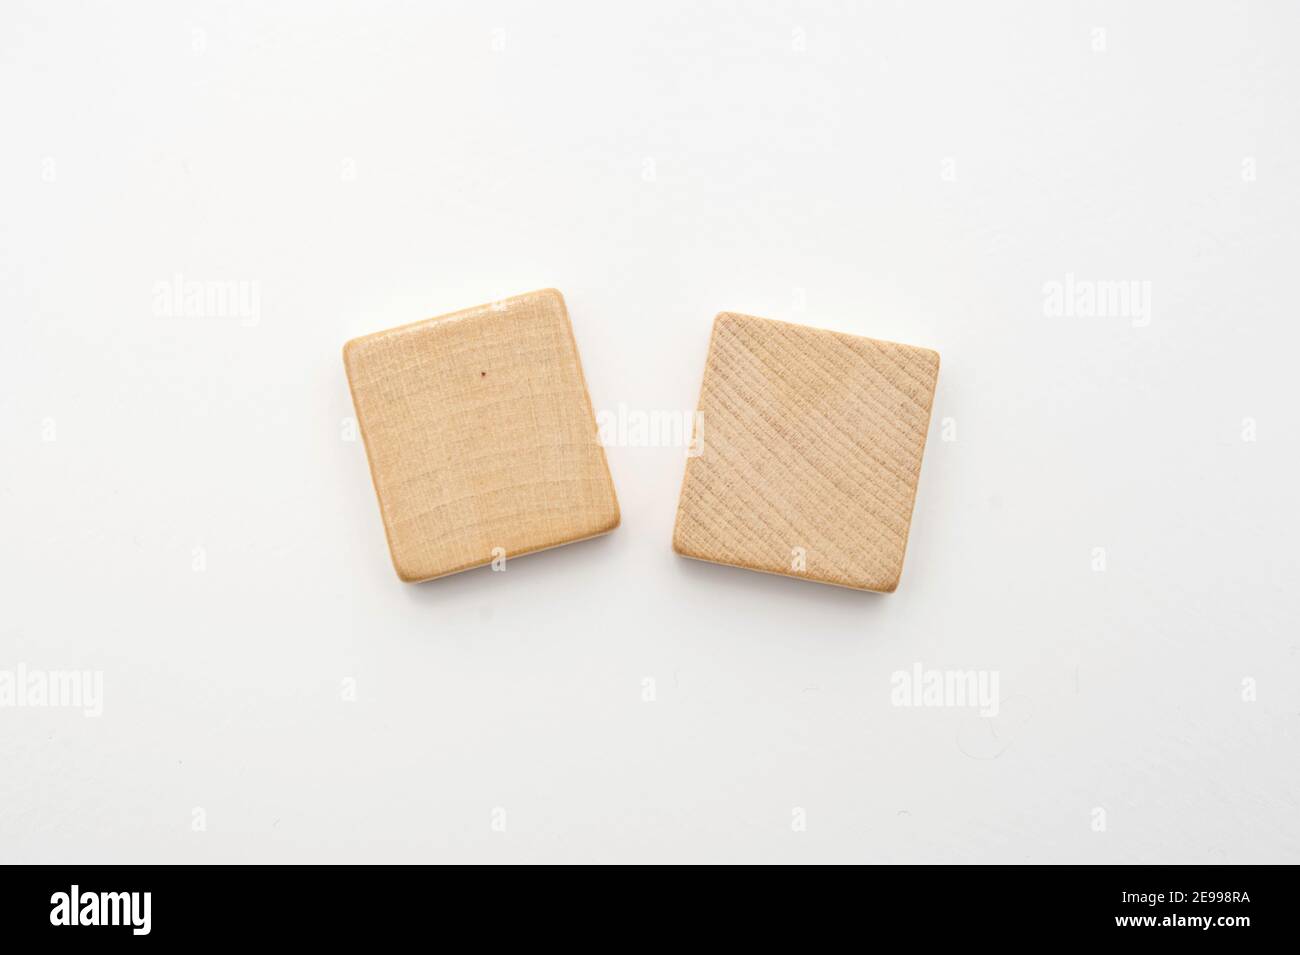 two blank wooden tiles isolated Stock Photo